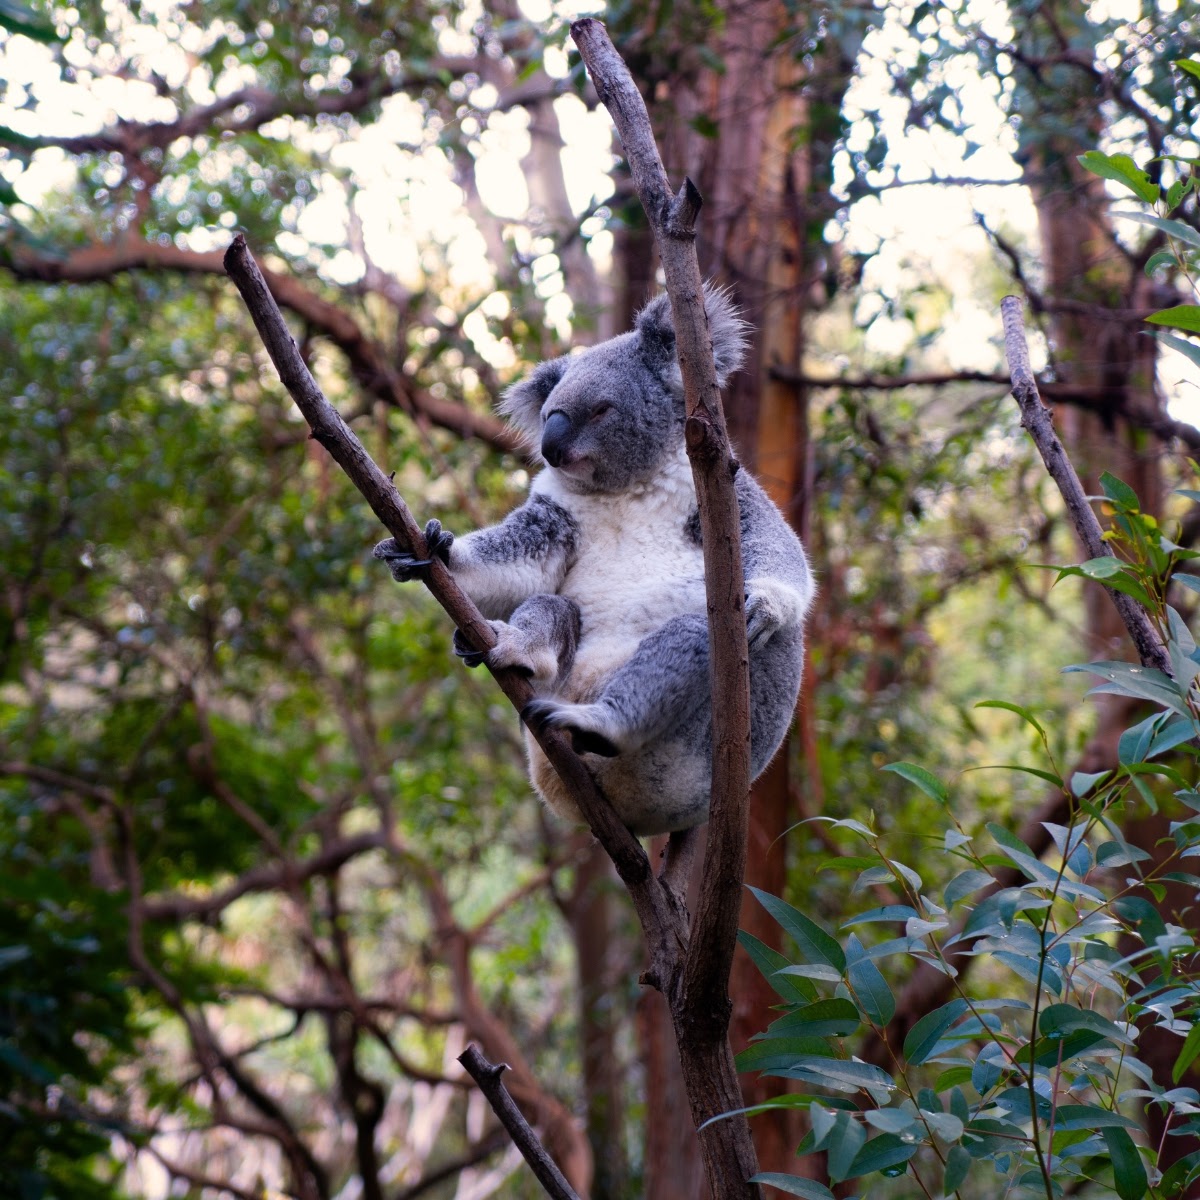 Learn more about Australia's enchanting fauna